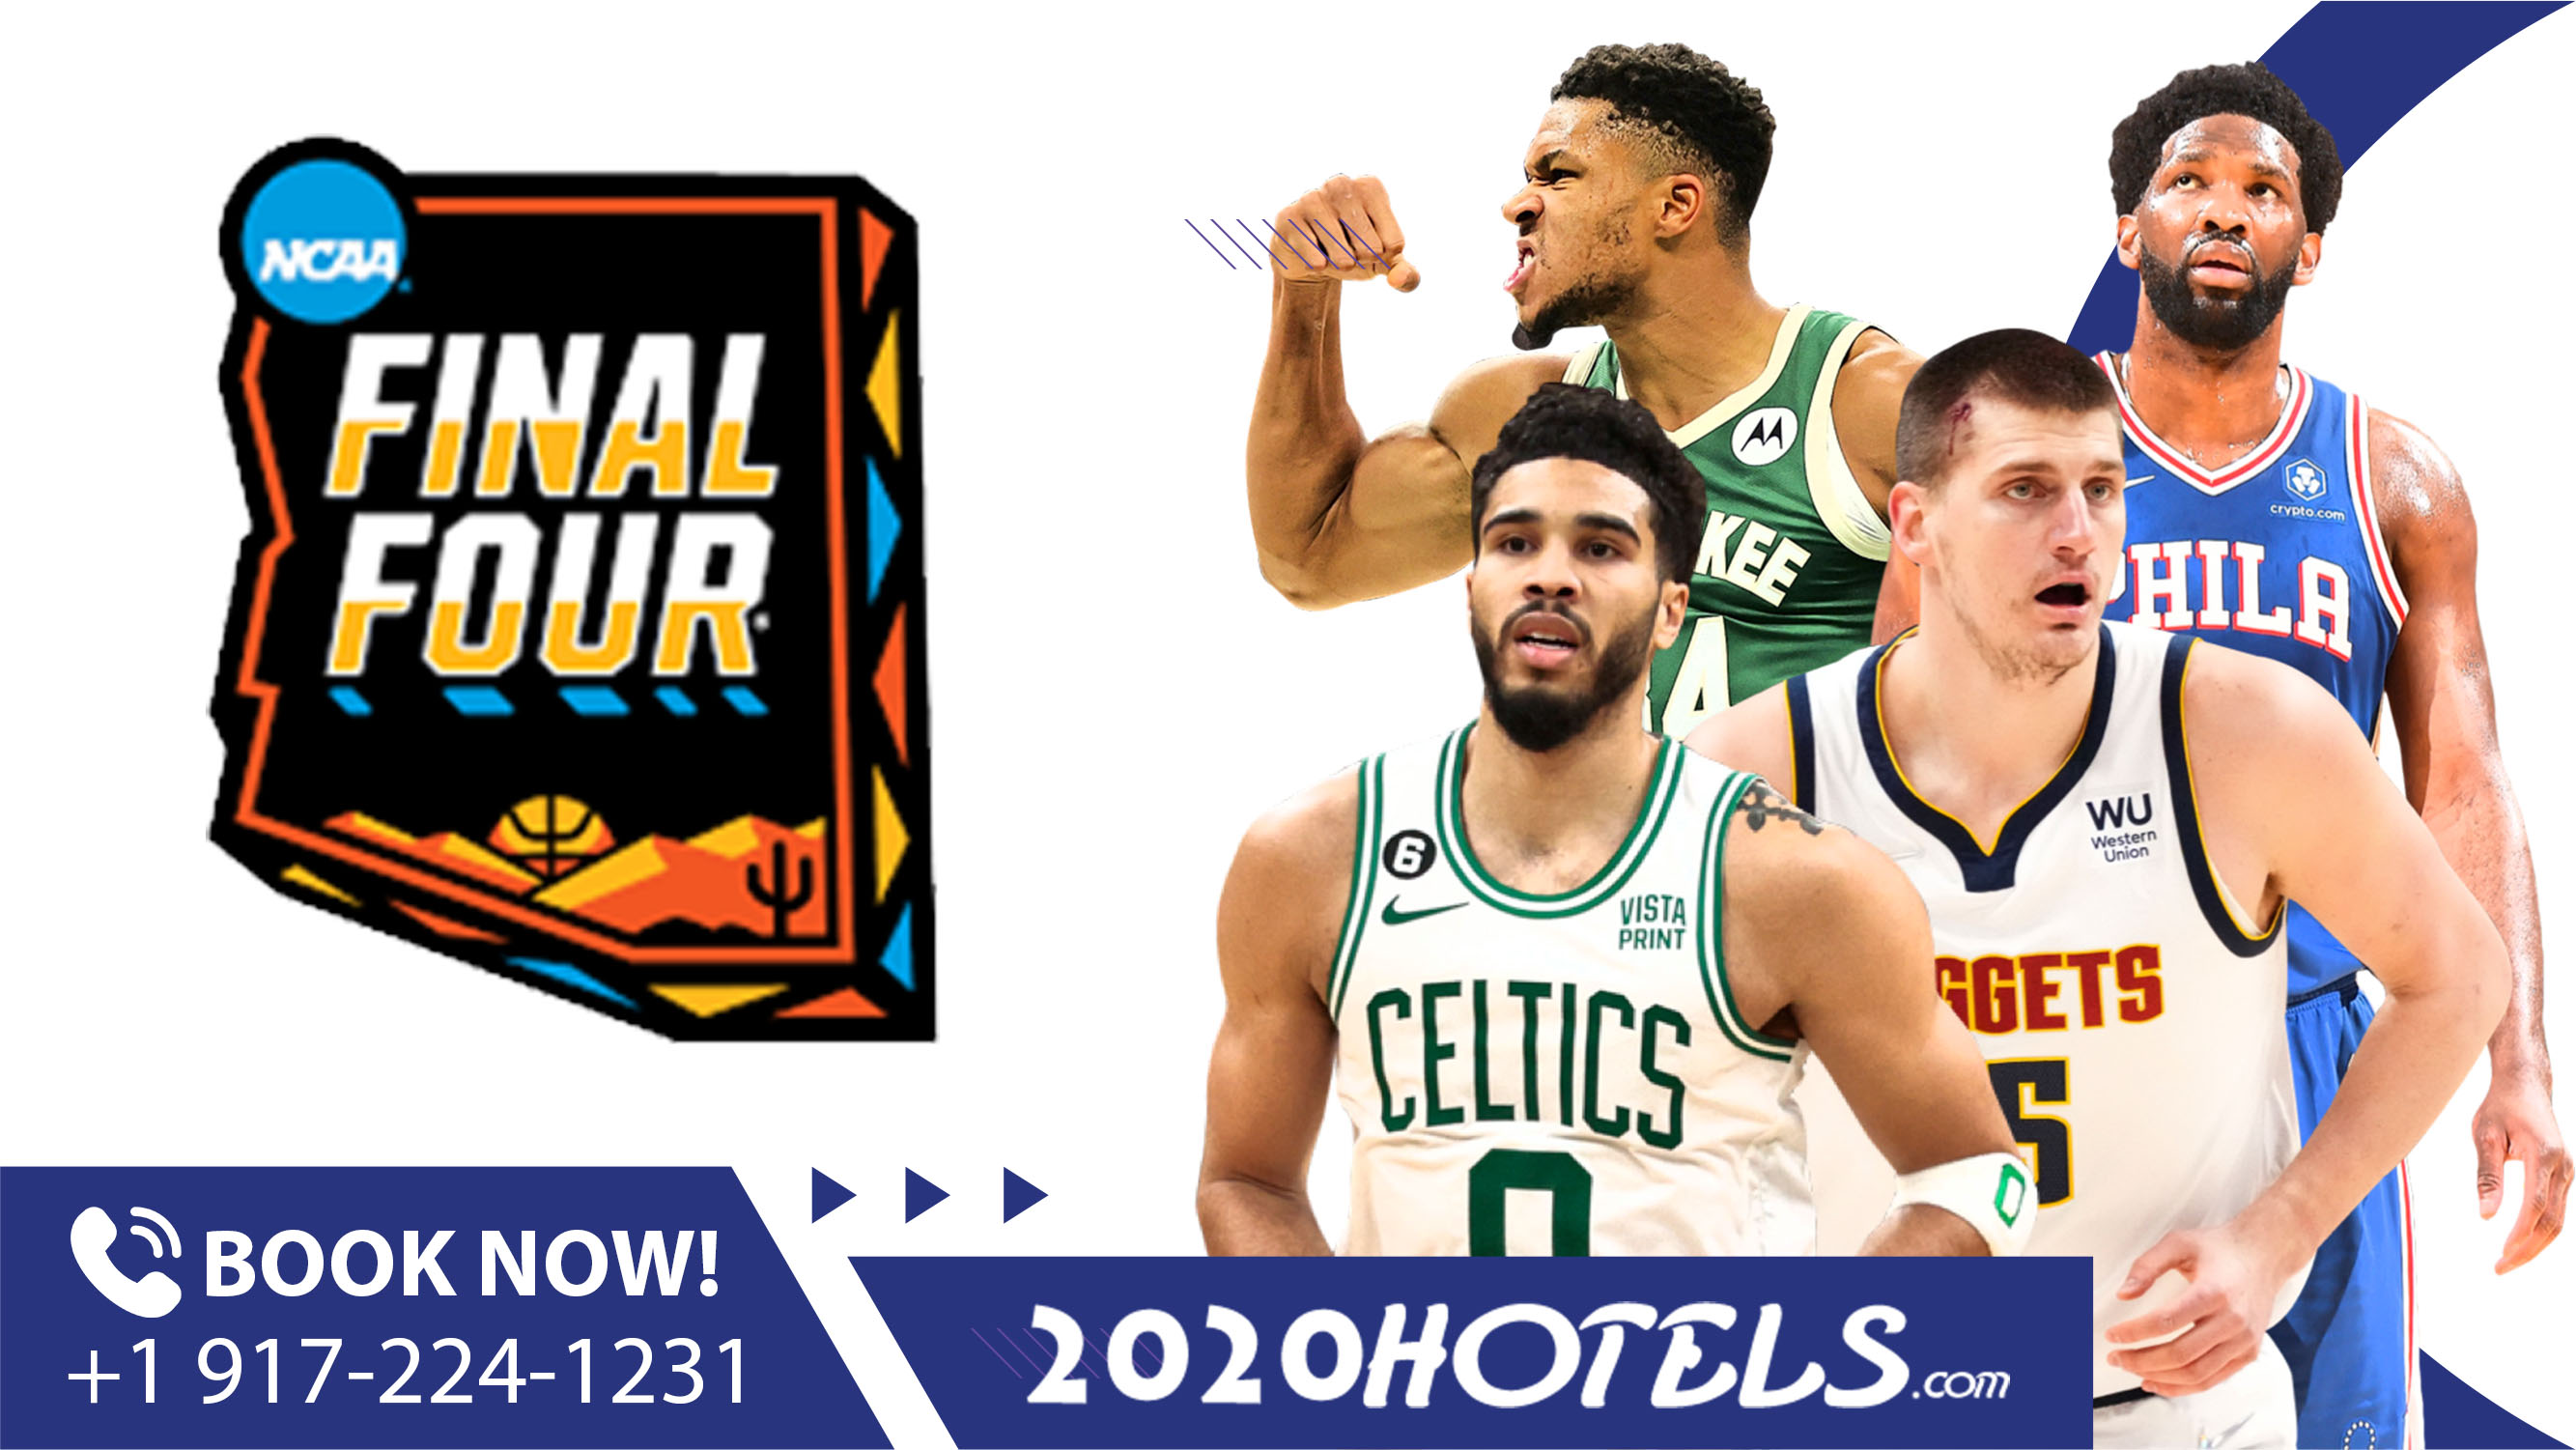 Book Hotels and Packages for NCAA Final Four 2024 April 6 and 8, 2024, Phoenix, State Farm Stadium, Arizona State University Book now our early bird specials! Click here for more info!